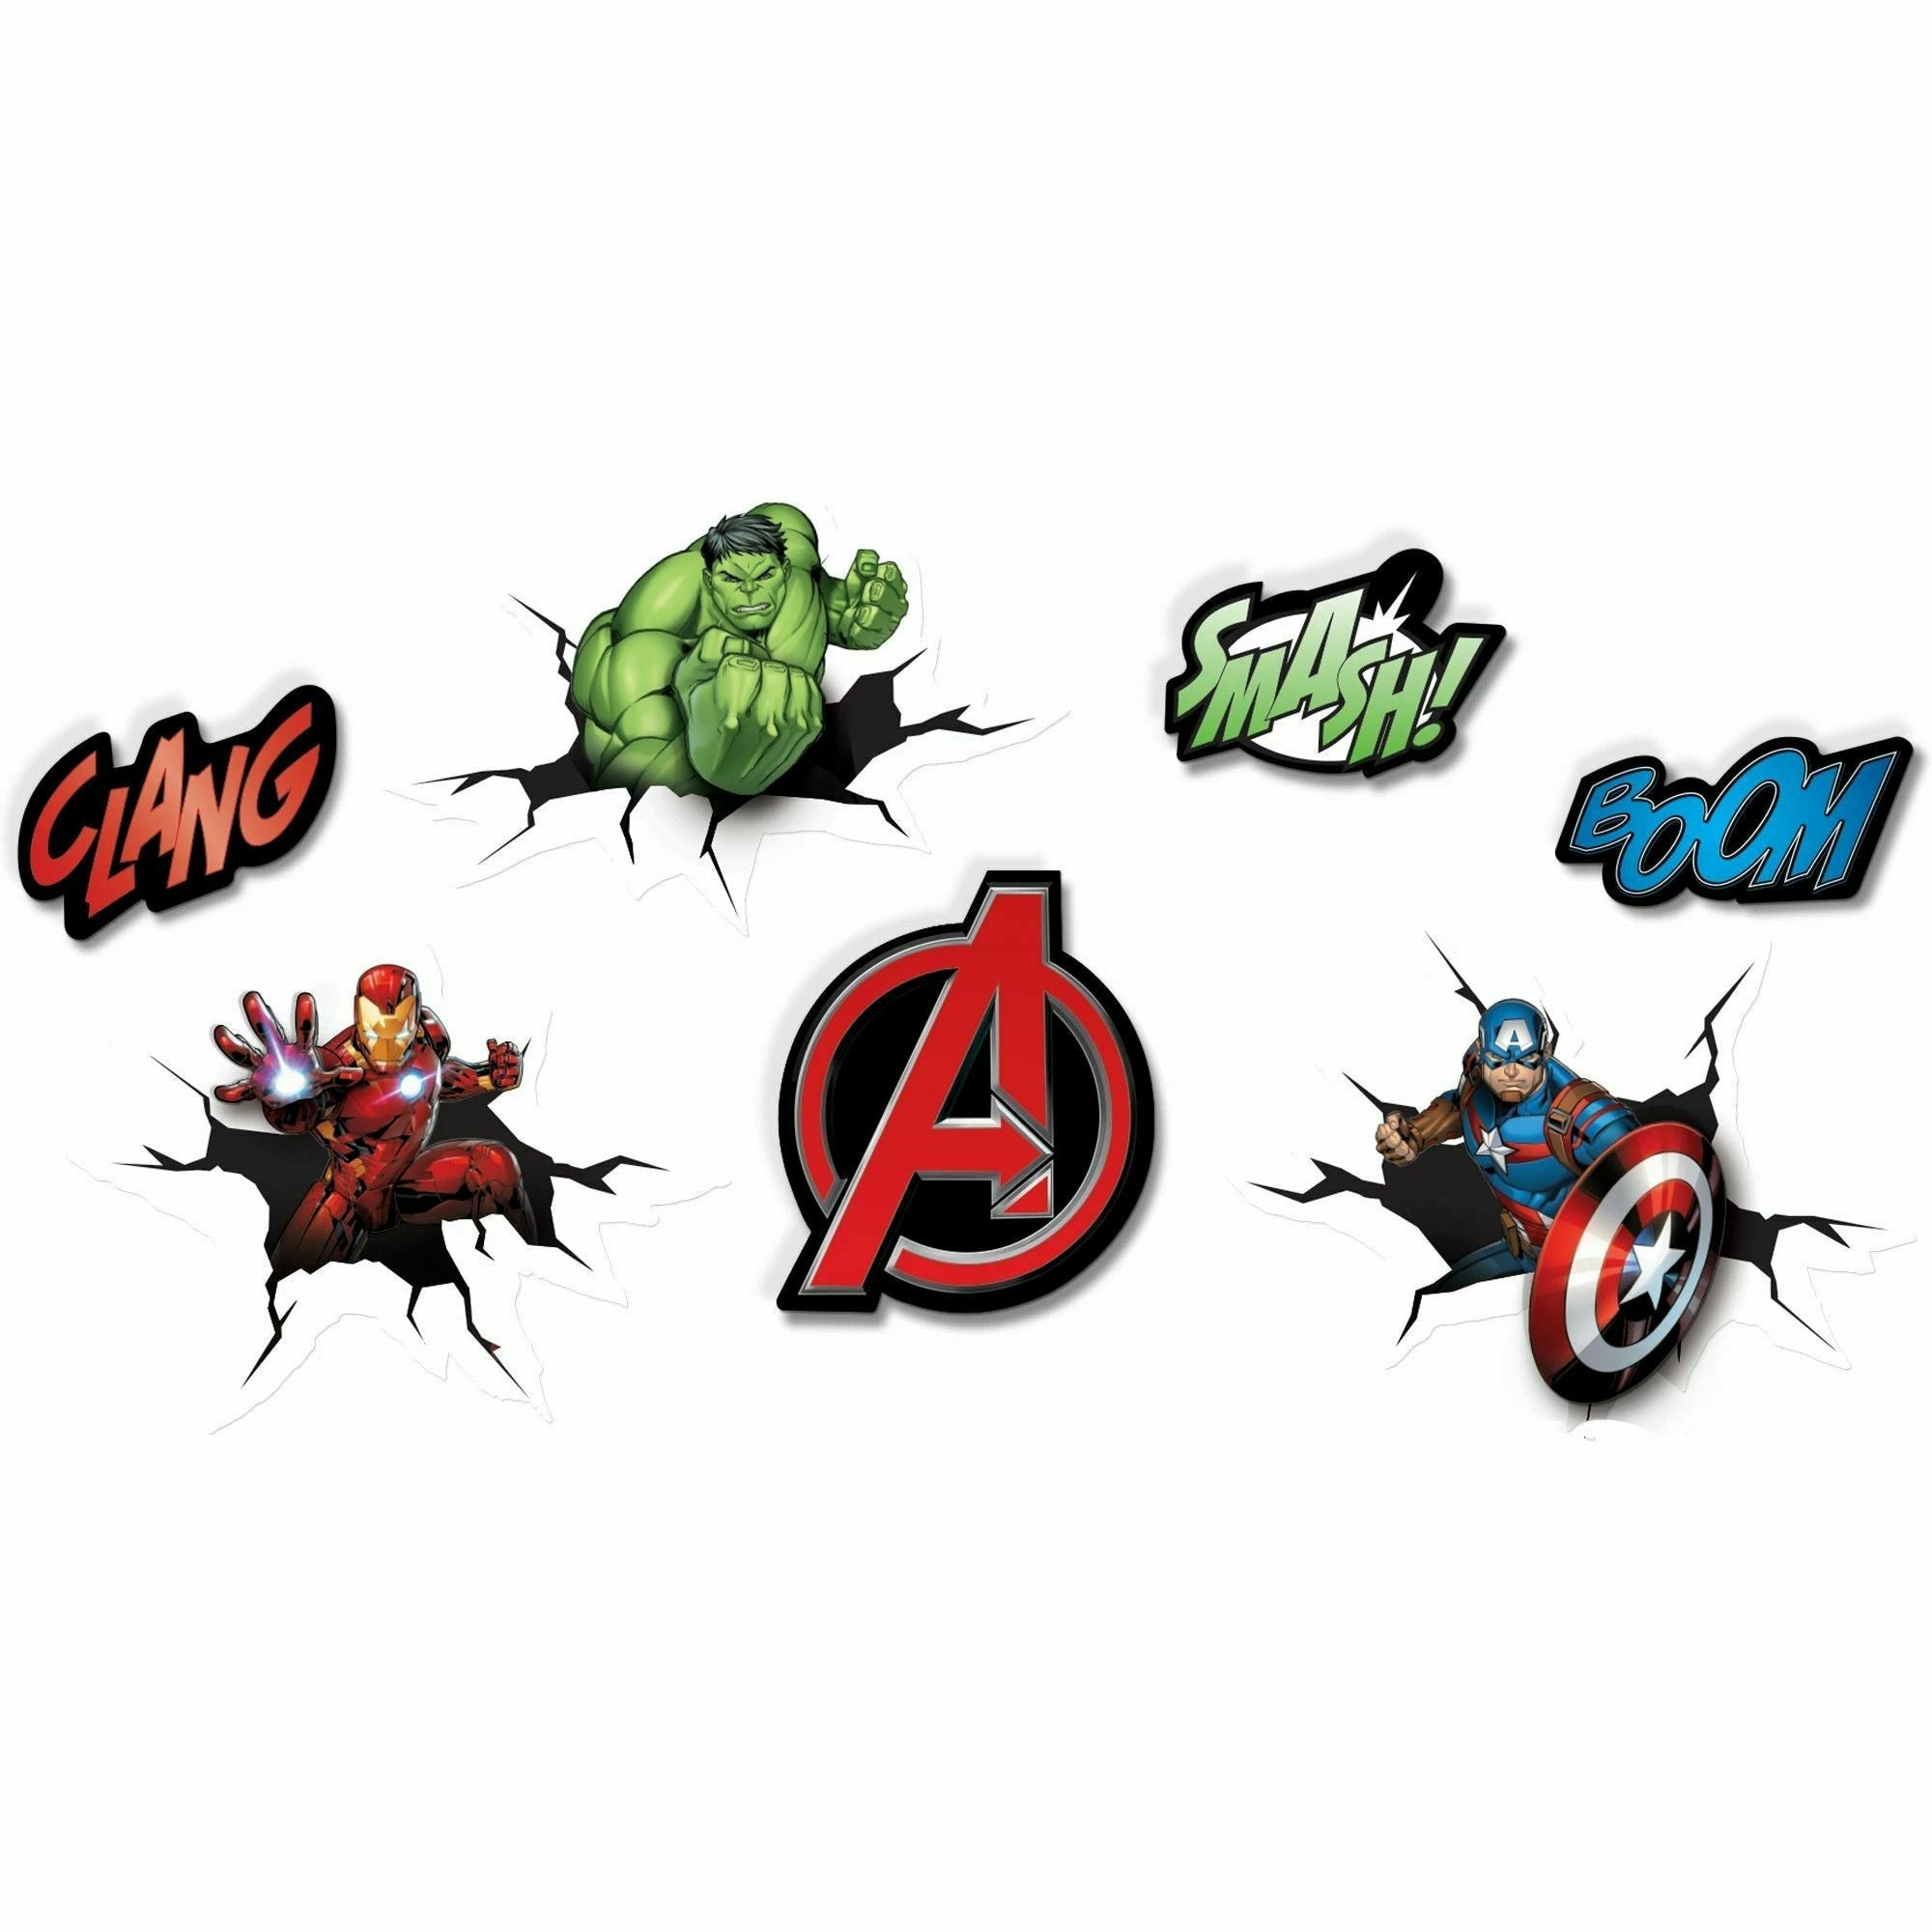 Marvel Avengers Powers Unite Wall Decorations - Ultimate Party Super Stores